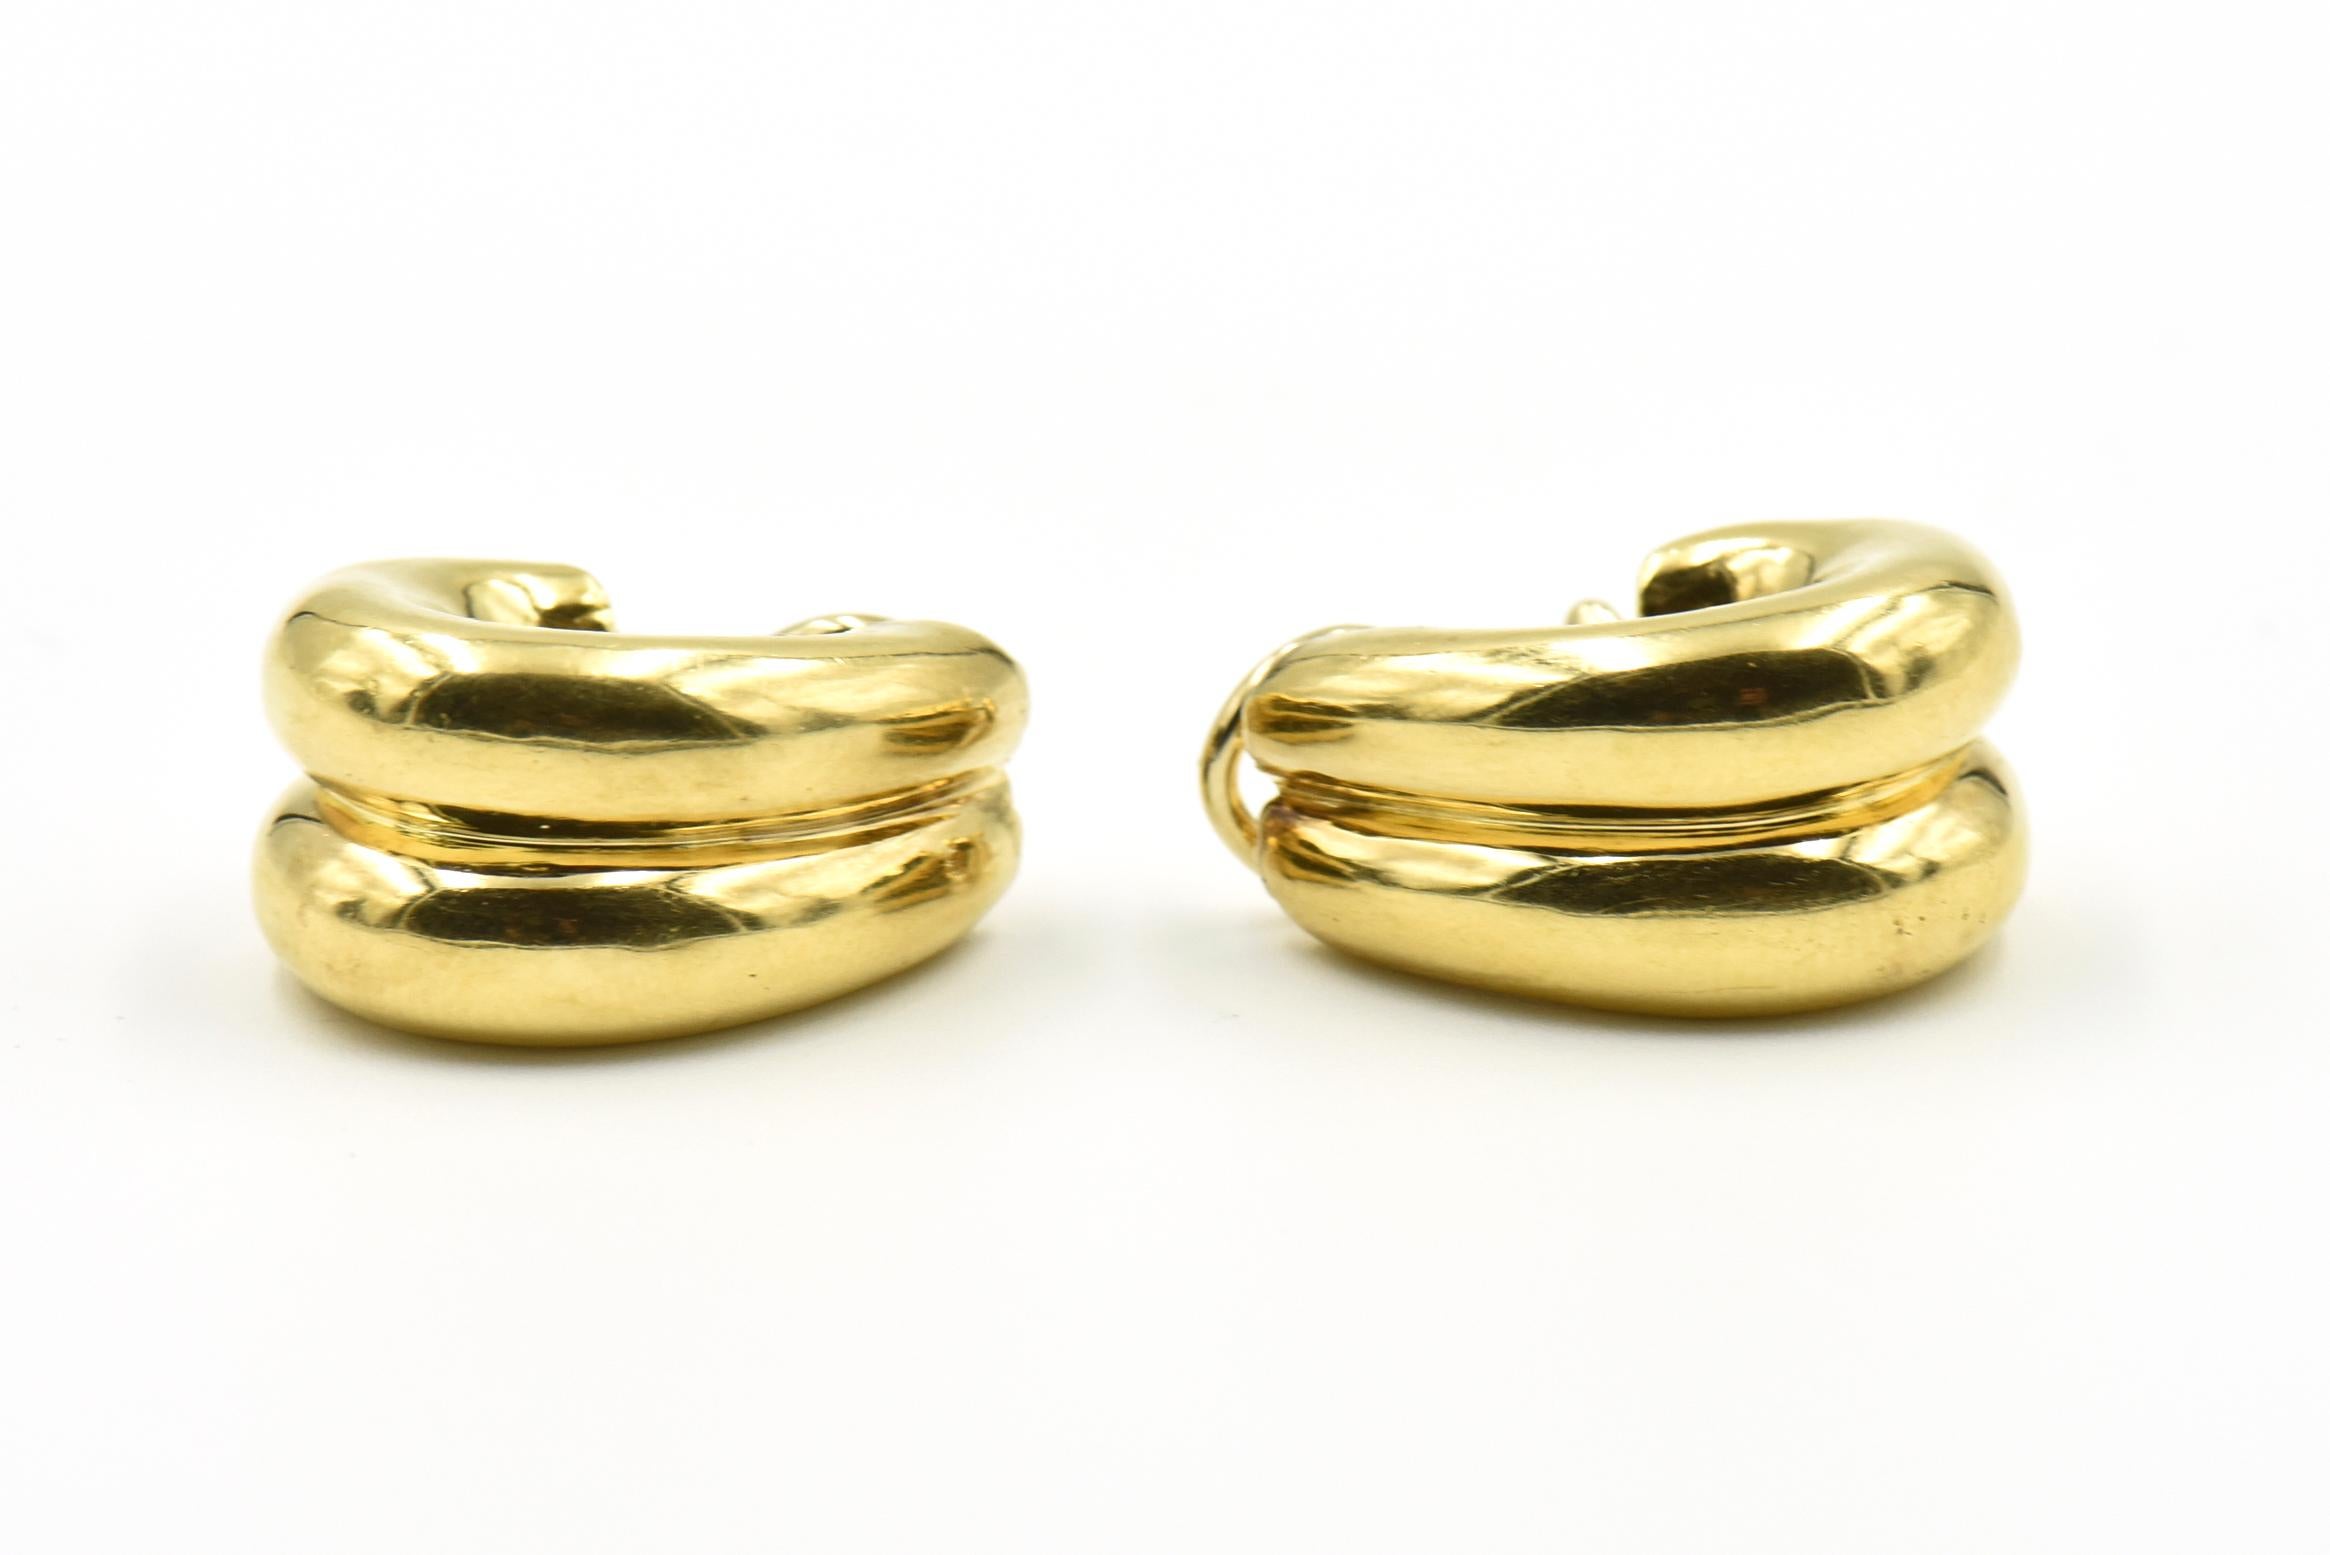 Shiny Finish Double Hoop Gold Earrings In Good Condition For Sale In Miami Beach, FL